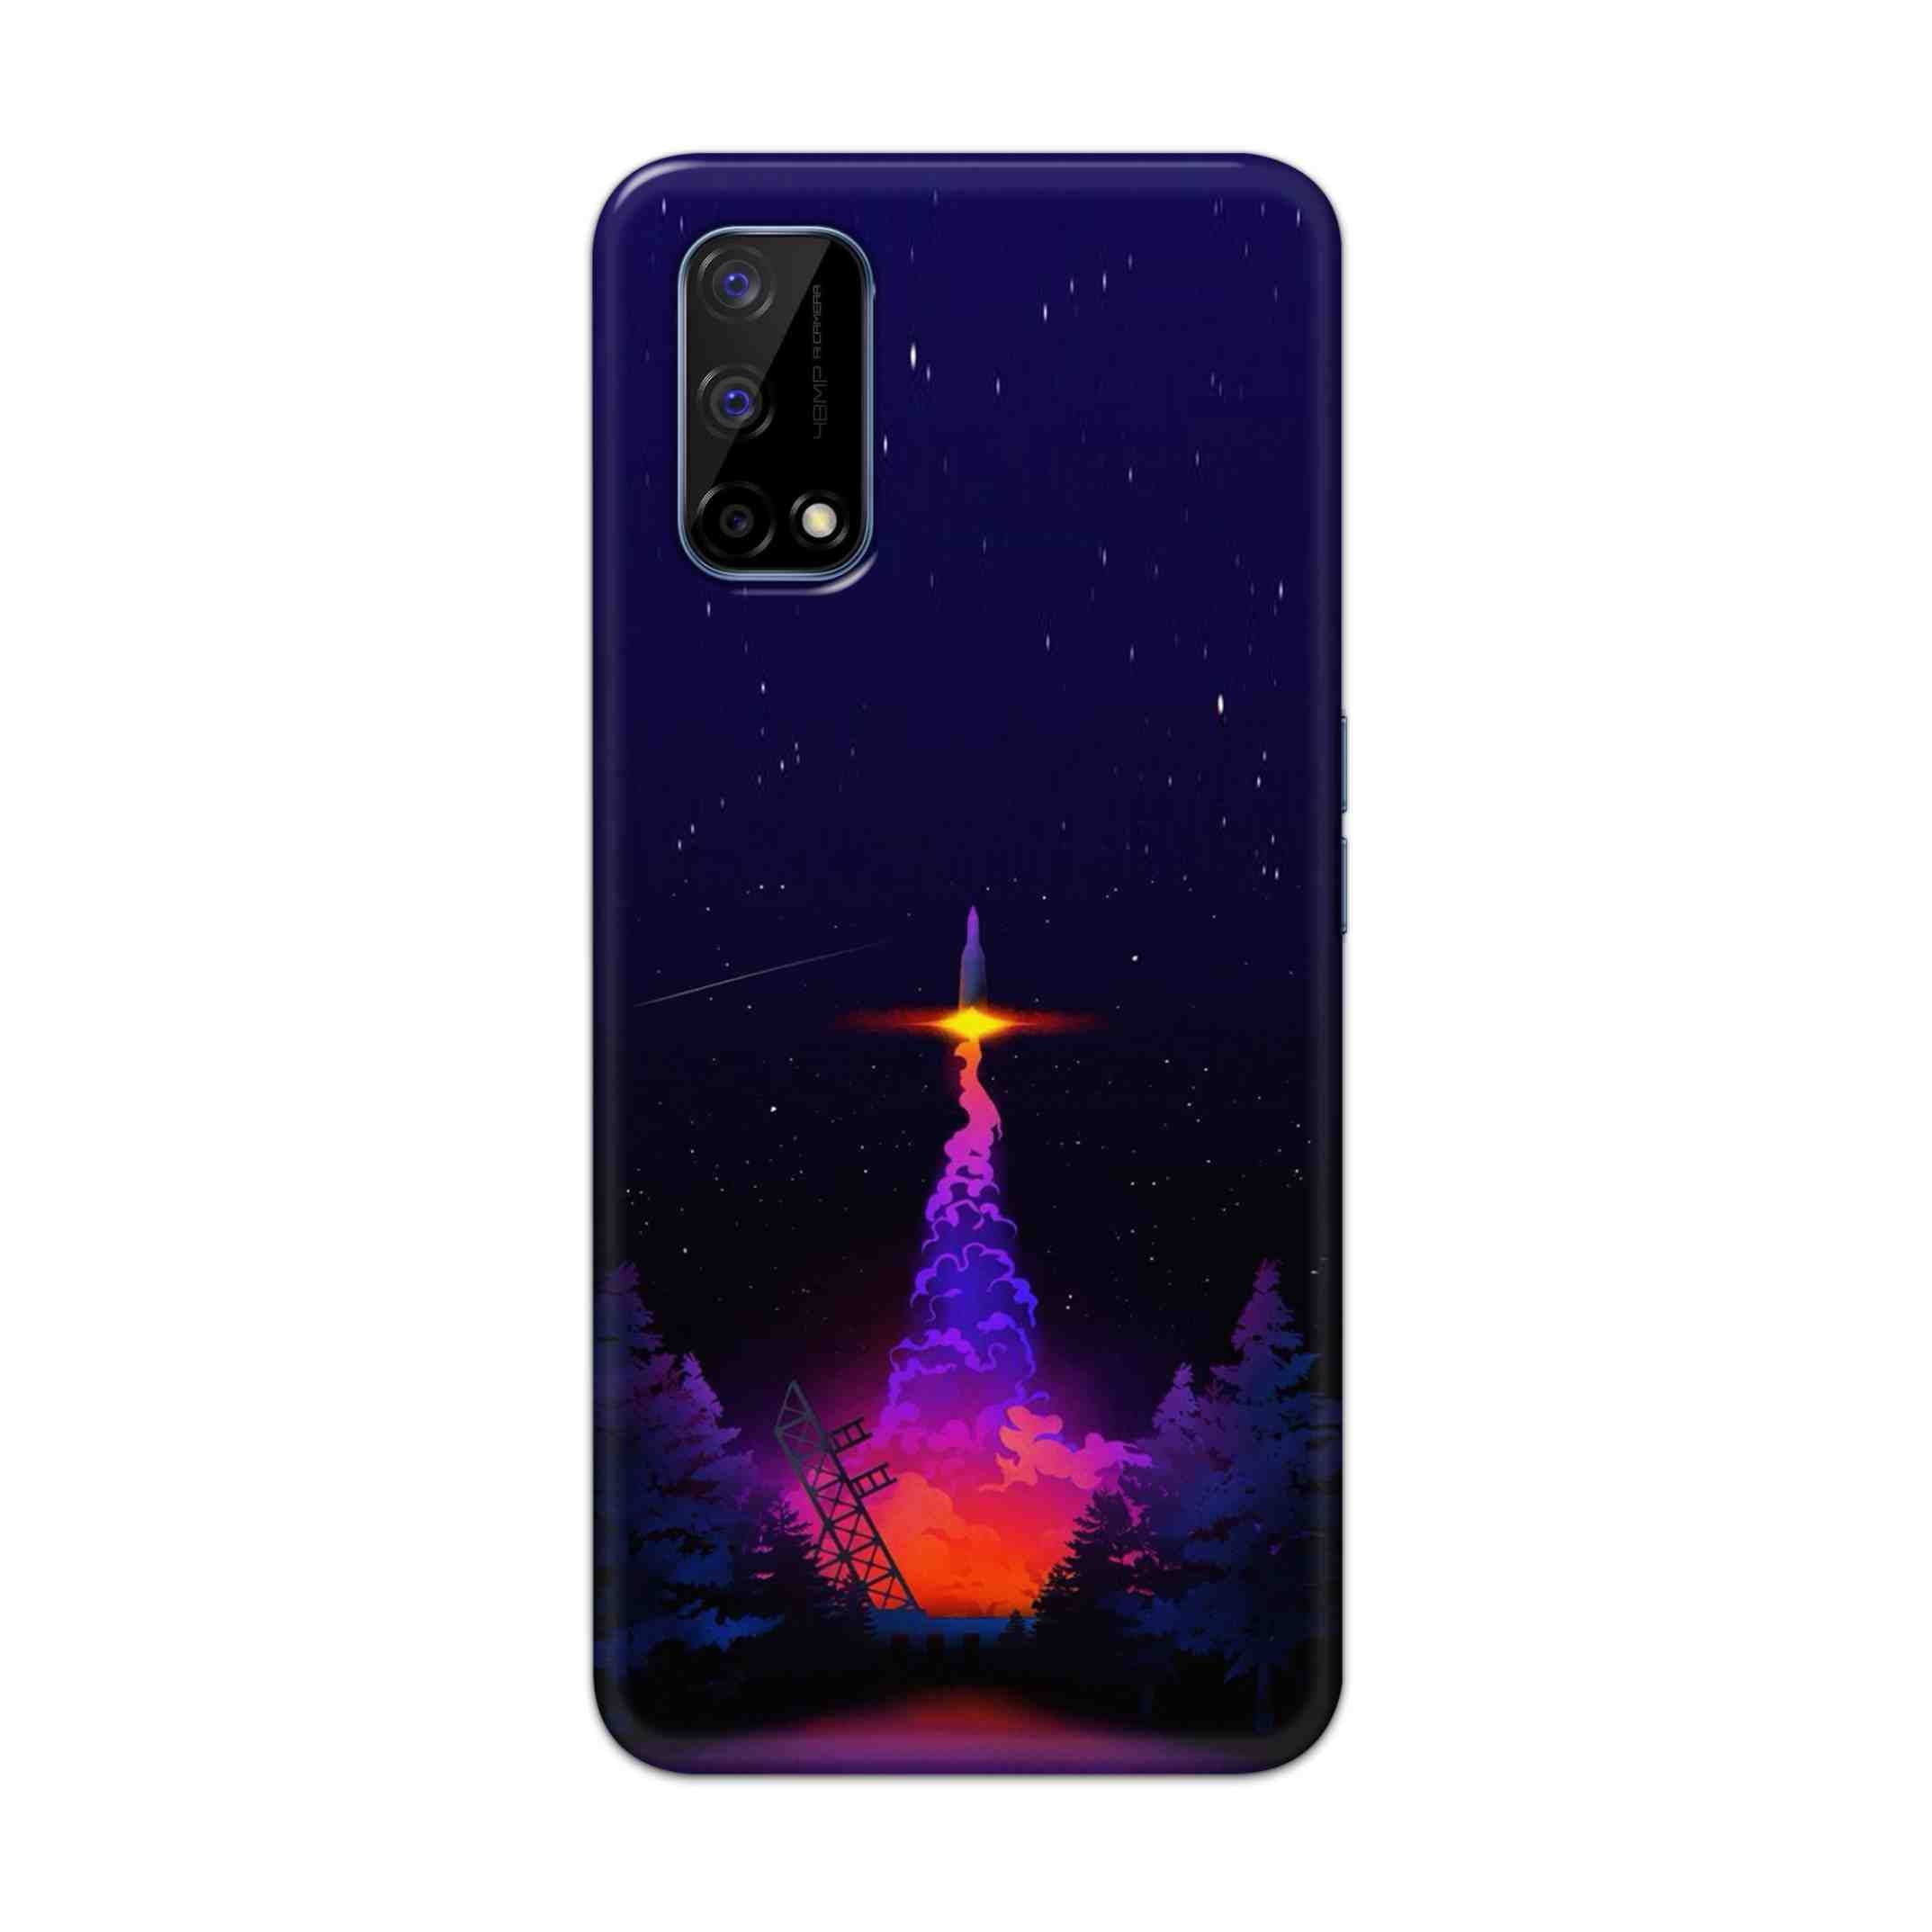 Buy Rocket Launching Hard Back Mobile Phone Case Cover For Realme Narzo 30 Pro Online